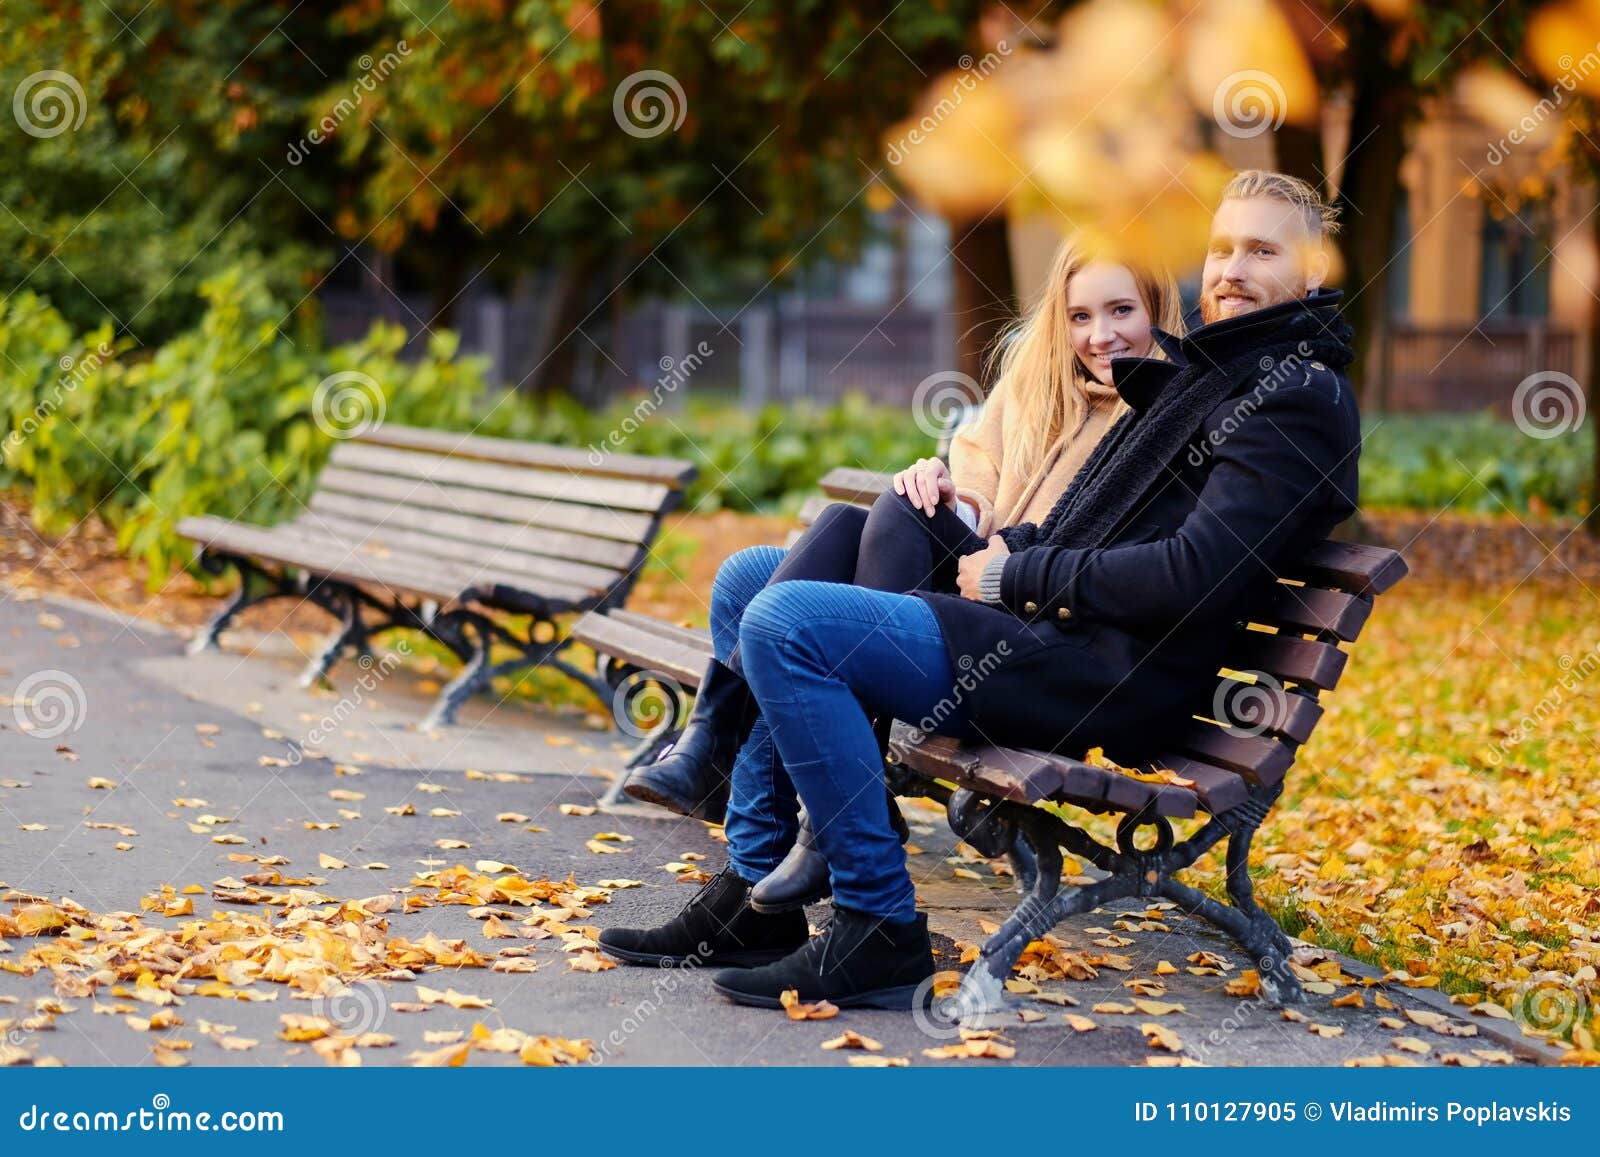 A Man and a Woman Sits on a Bench. Stock Image - Image of attractive ...